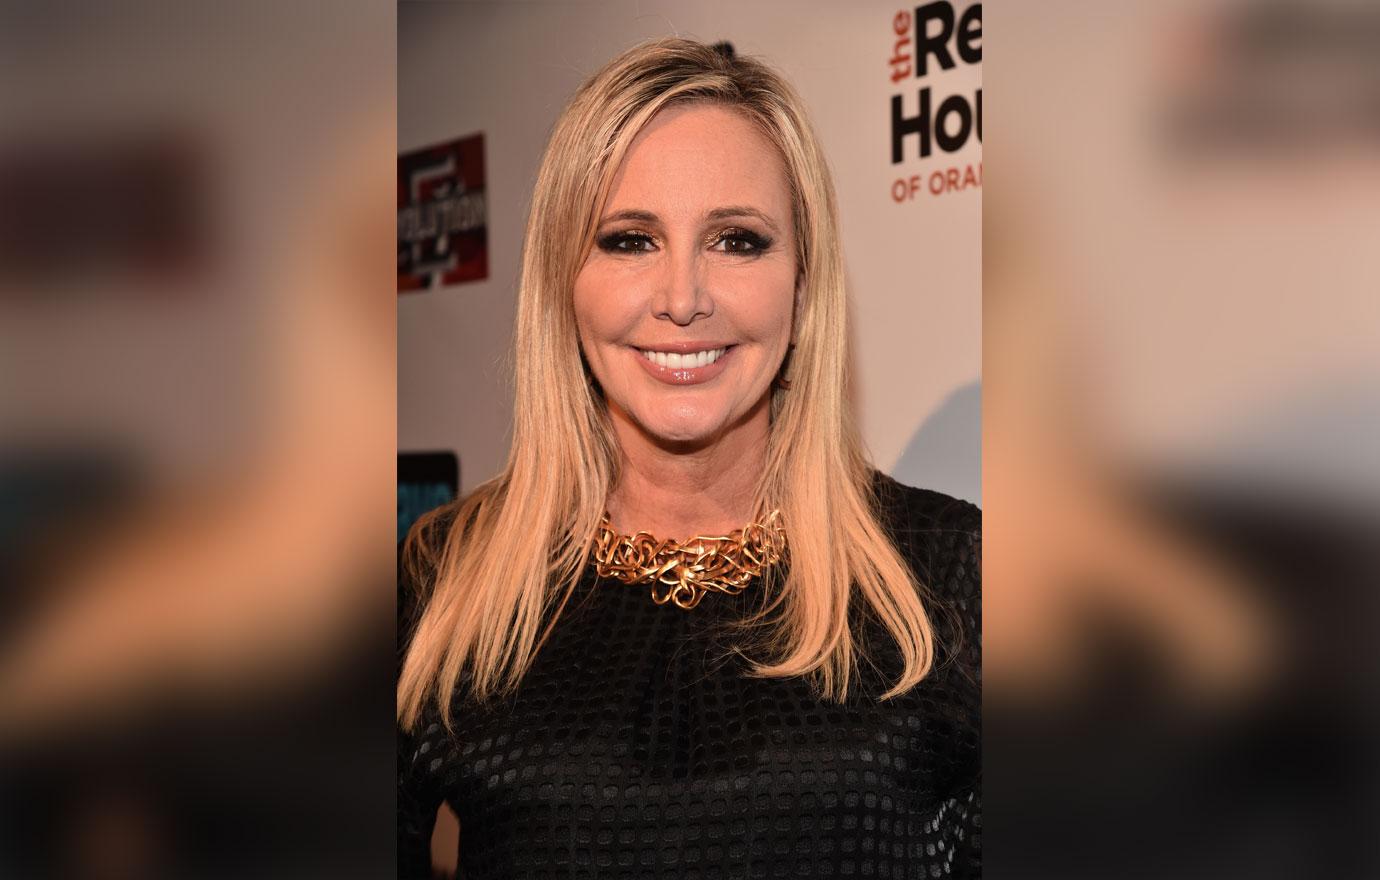 ‘rhoc Star Shannon Beador Plastic Surgery Makeover Revealed By Top Docs